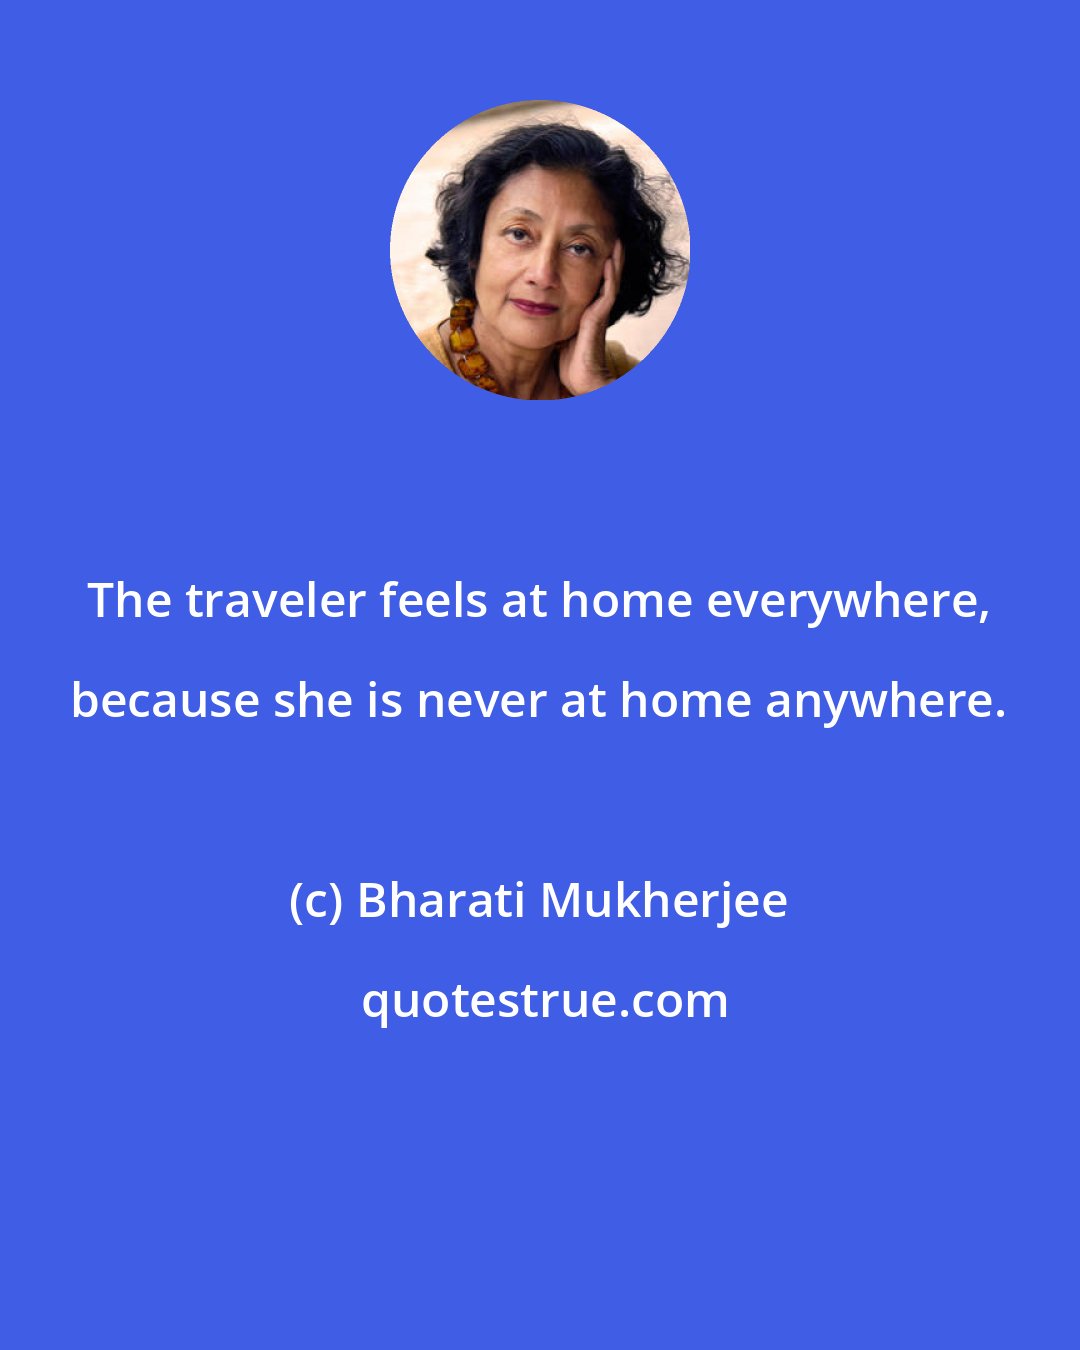 Bharati Mukherjee: The traveler feels at home everywhere, because she is never at home anywhere.